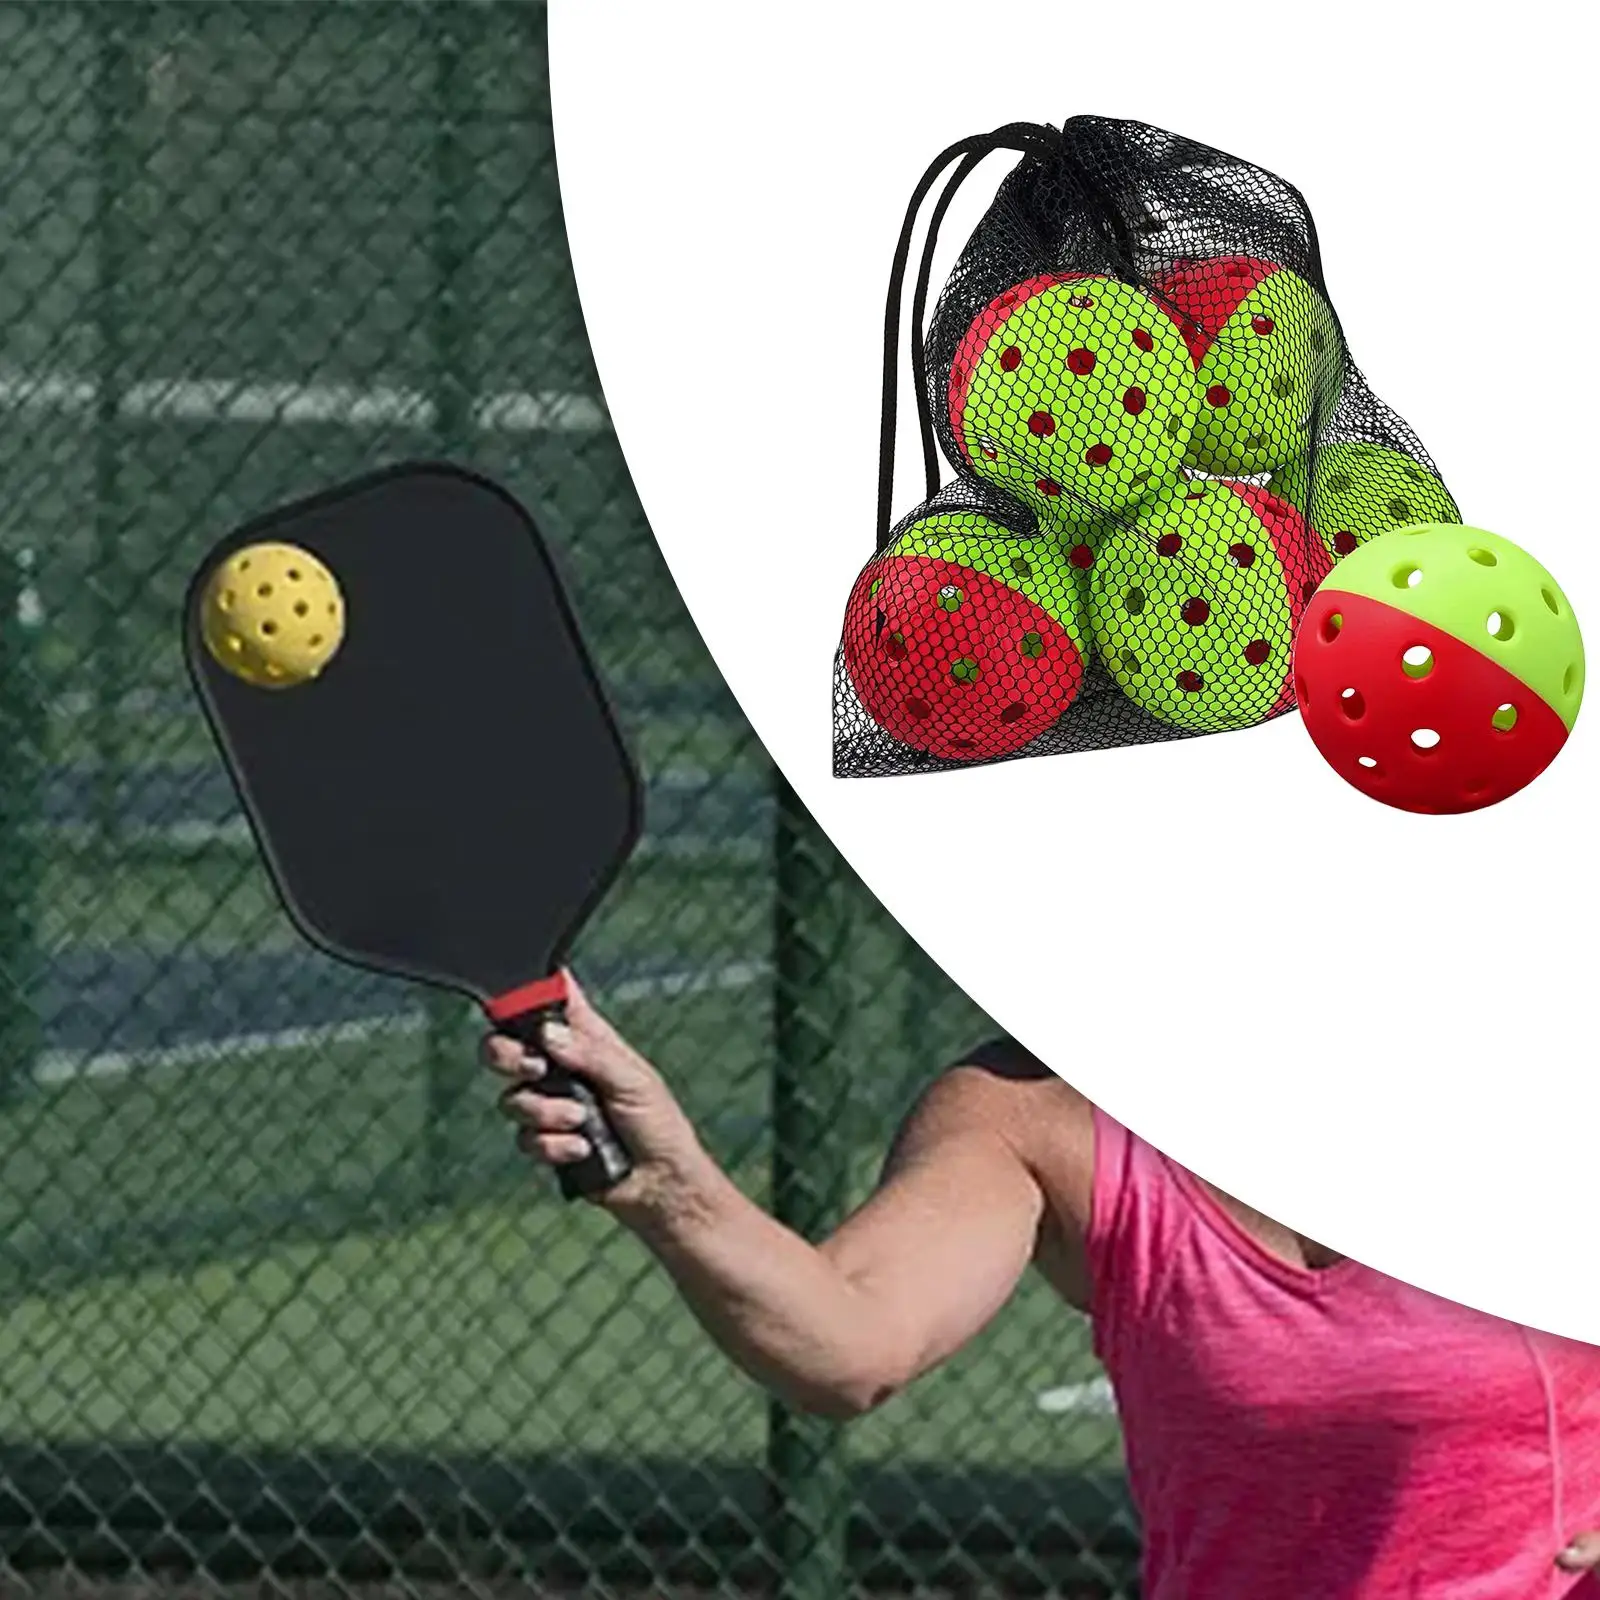 6 Pieces Pickleball Balls Standard Sports Pickle Balls with Mesh Bag for Training Sports Professional Perfomance Tournament Play